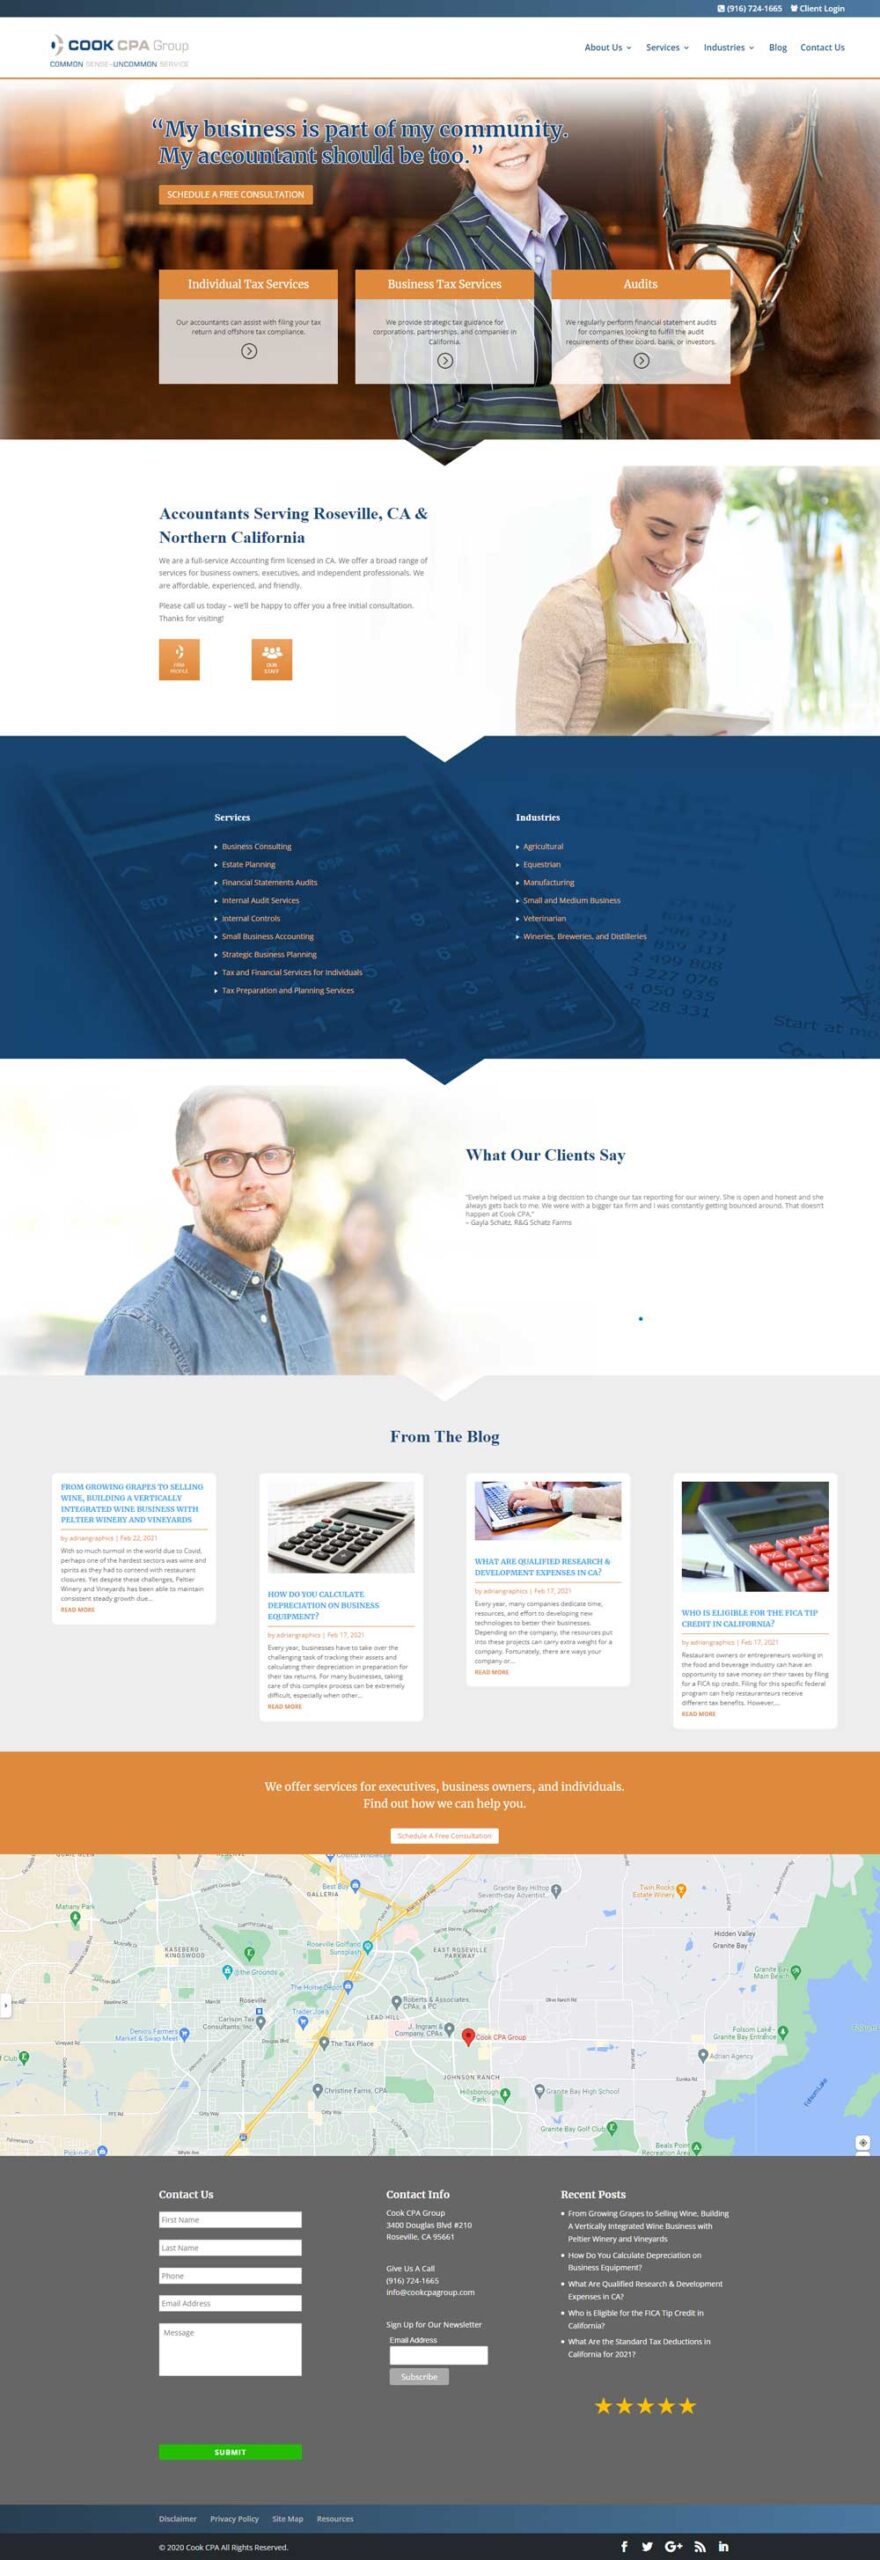 Cook CPA Marketing Case Study - Adrian Agency - responsive web design